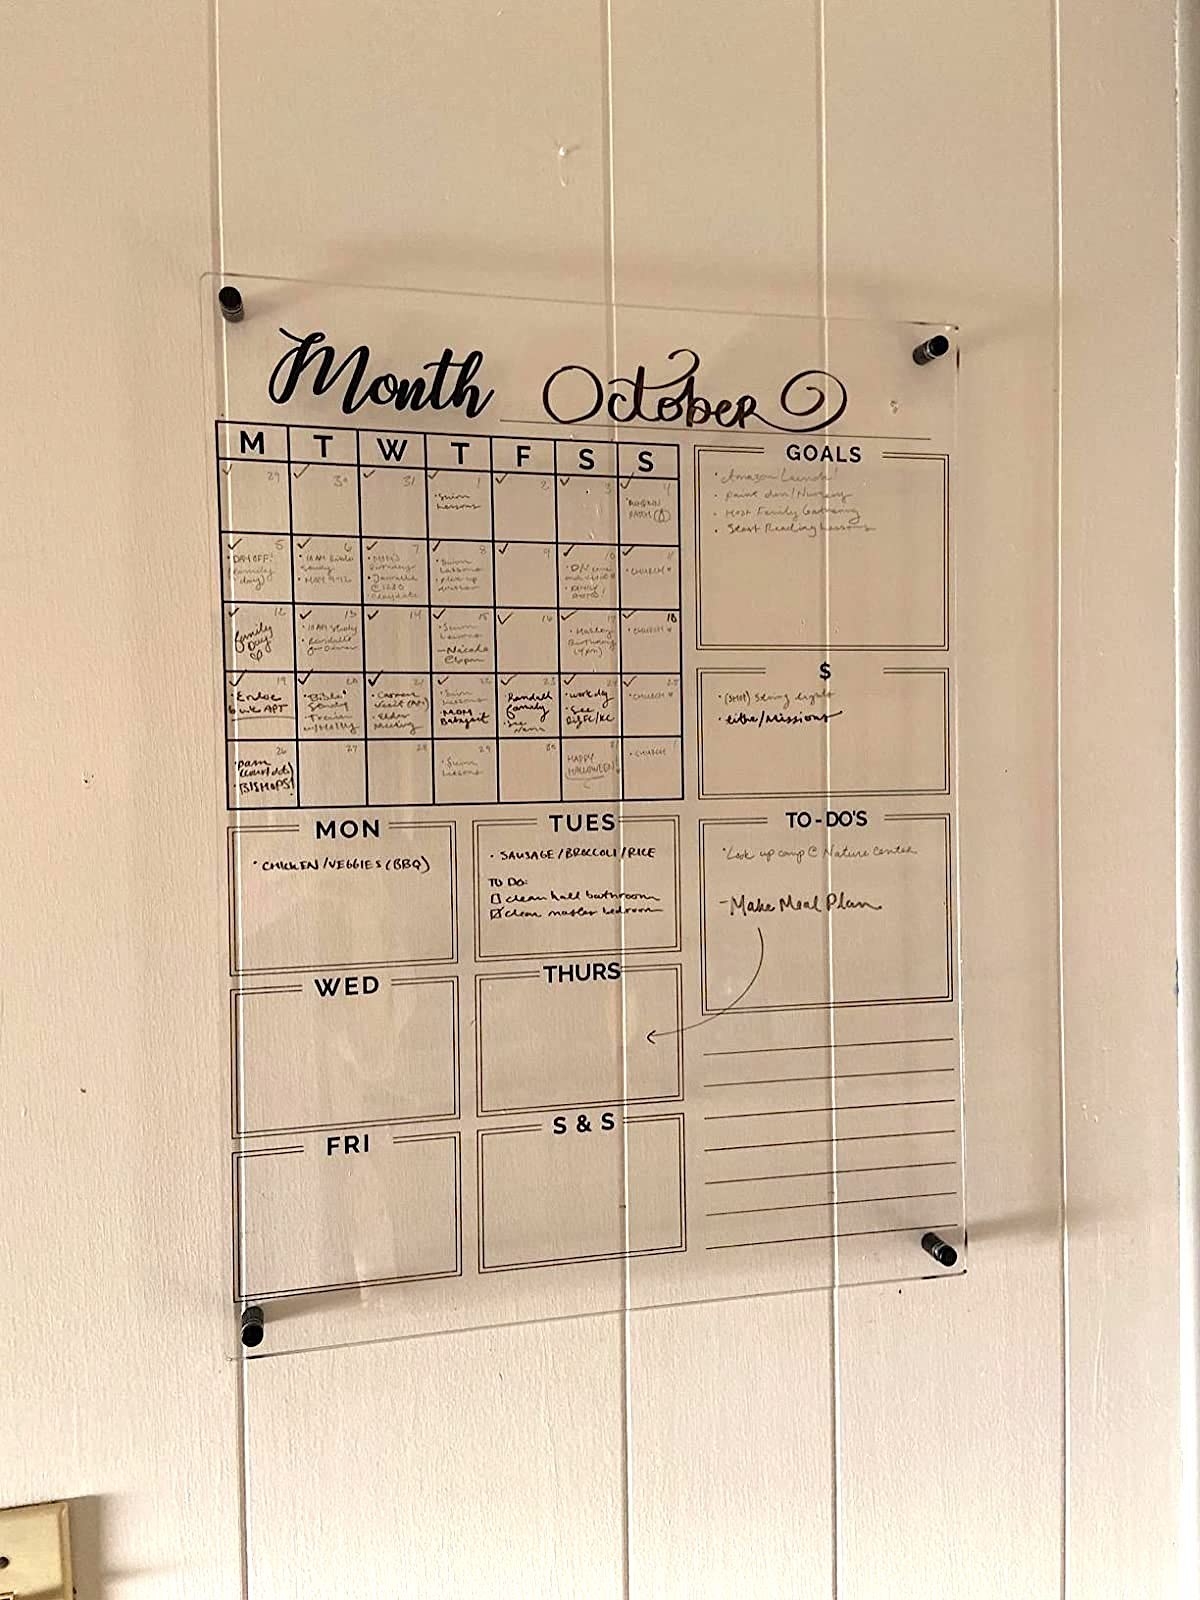 reviewer image of the acrylic calendar hanging on the wall showing a schedule for the month and week and an area for lists and notes